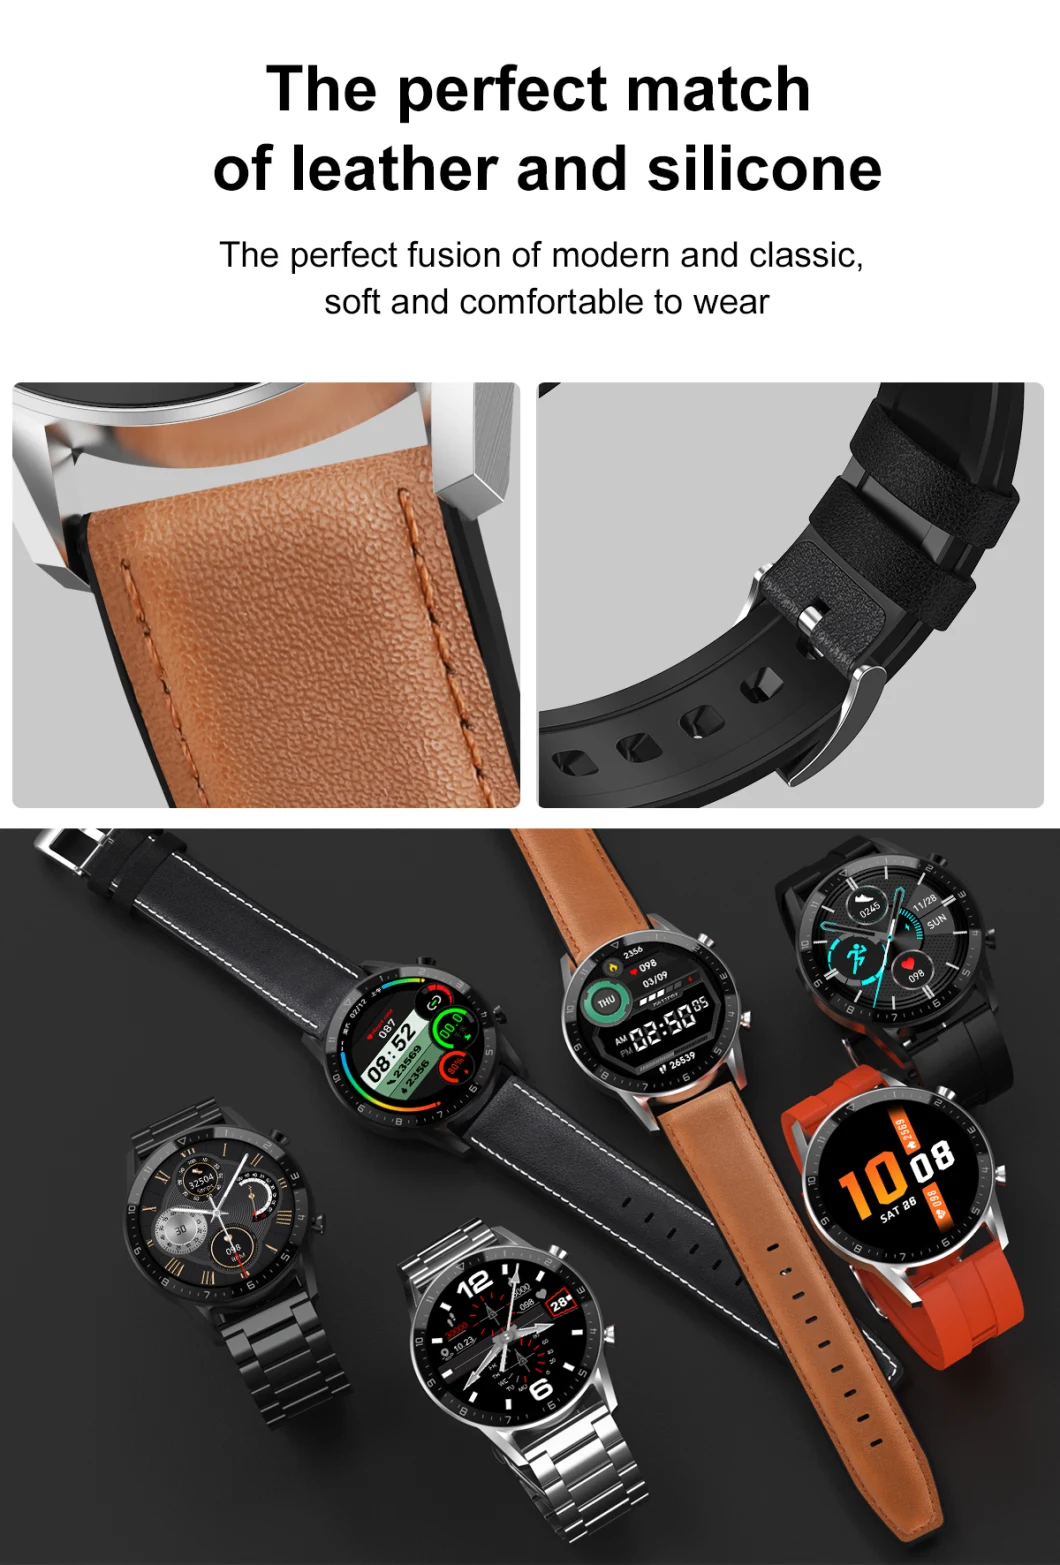 Fashionable Dial Sport Smartwatch Call Remote Photo Fitness 24hours Monitoring Smartwatch Touch Screen Sport Smart